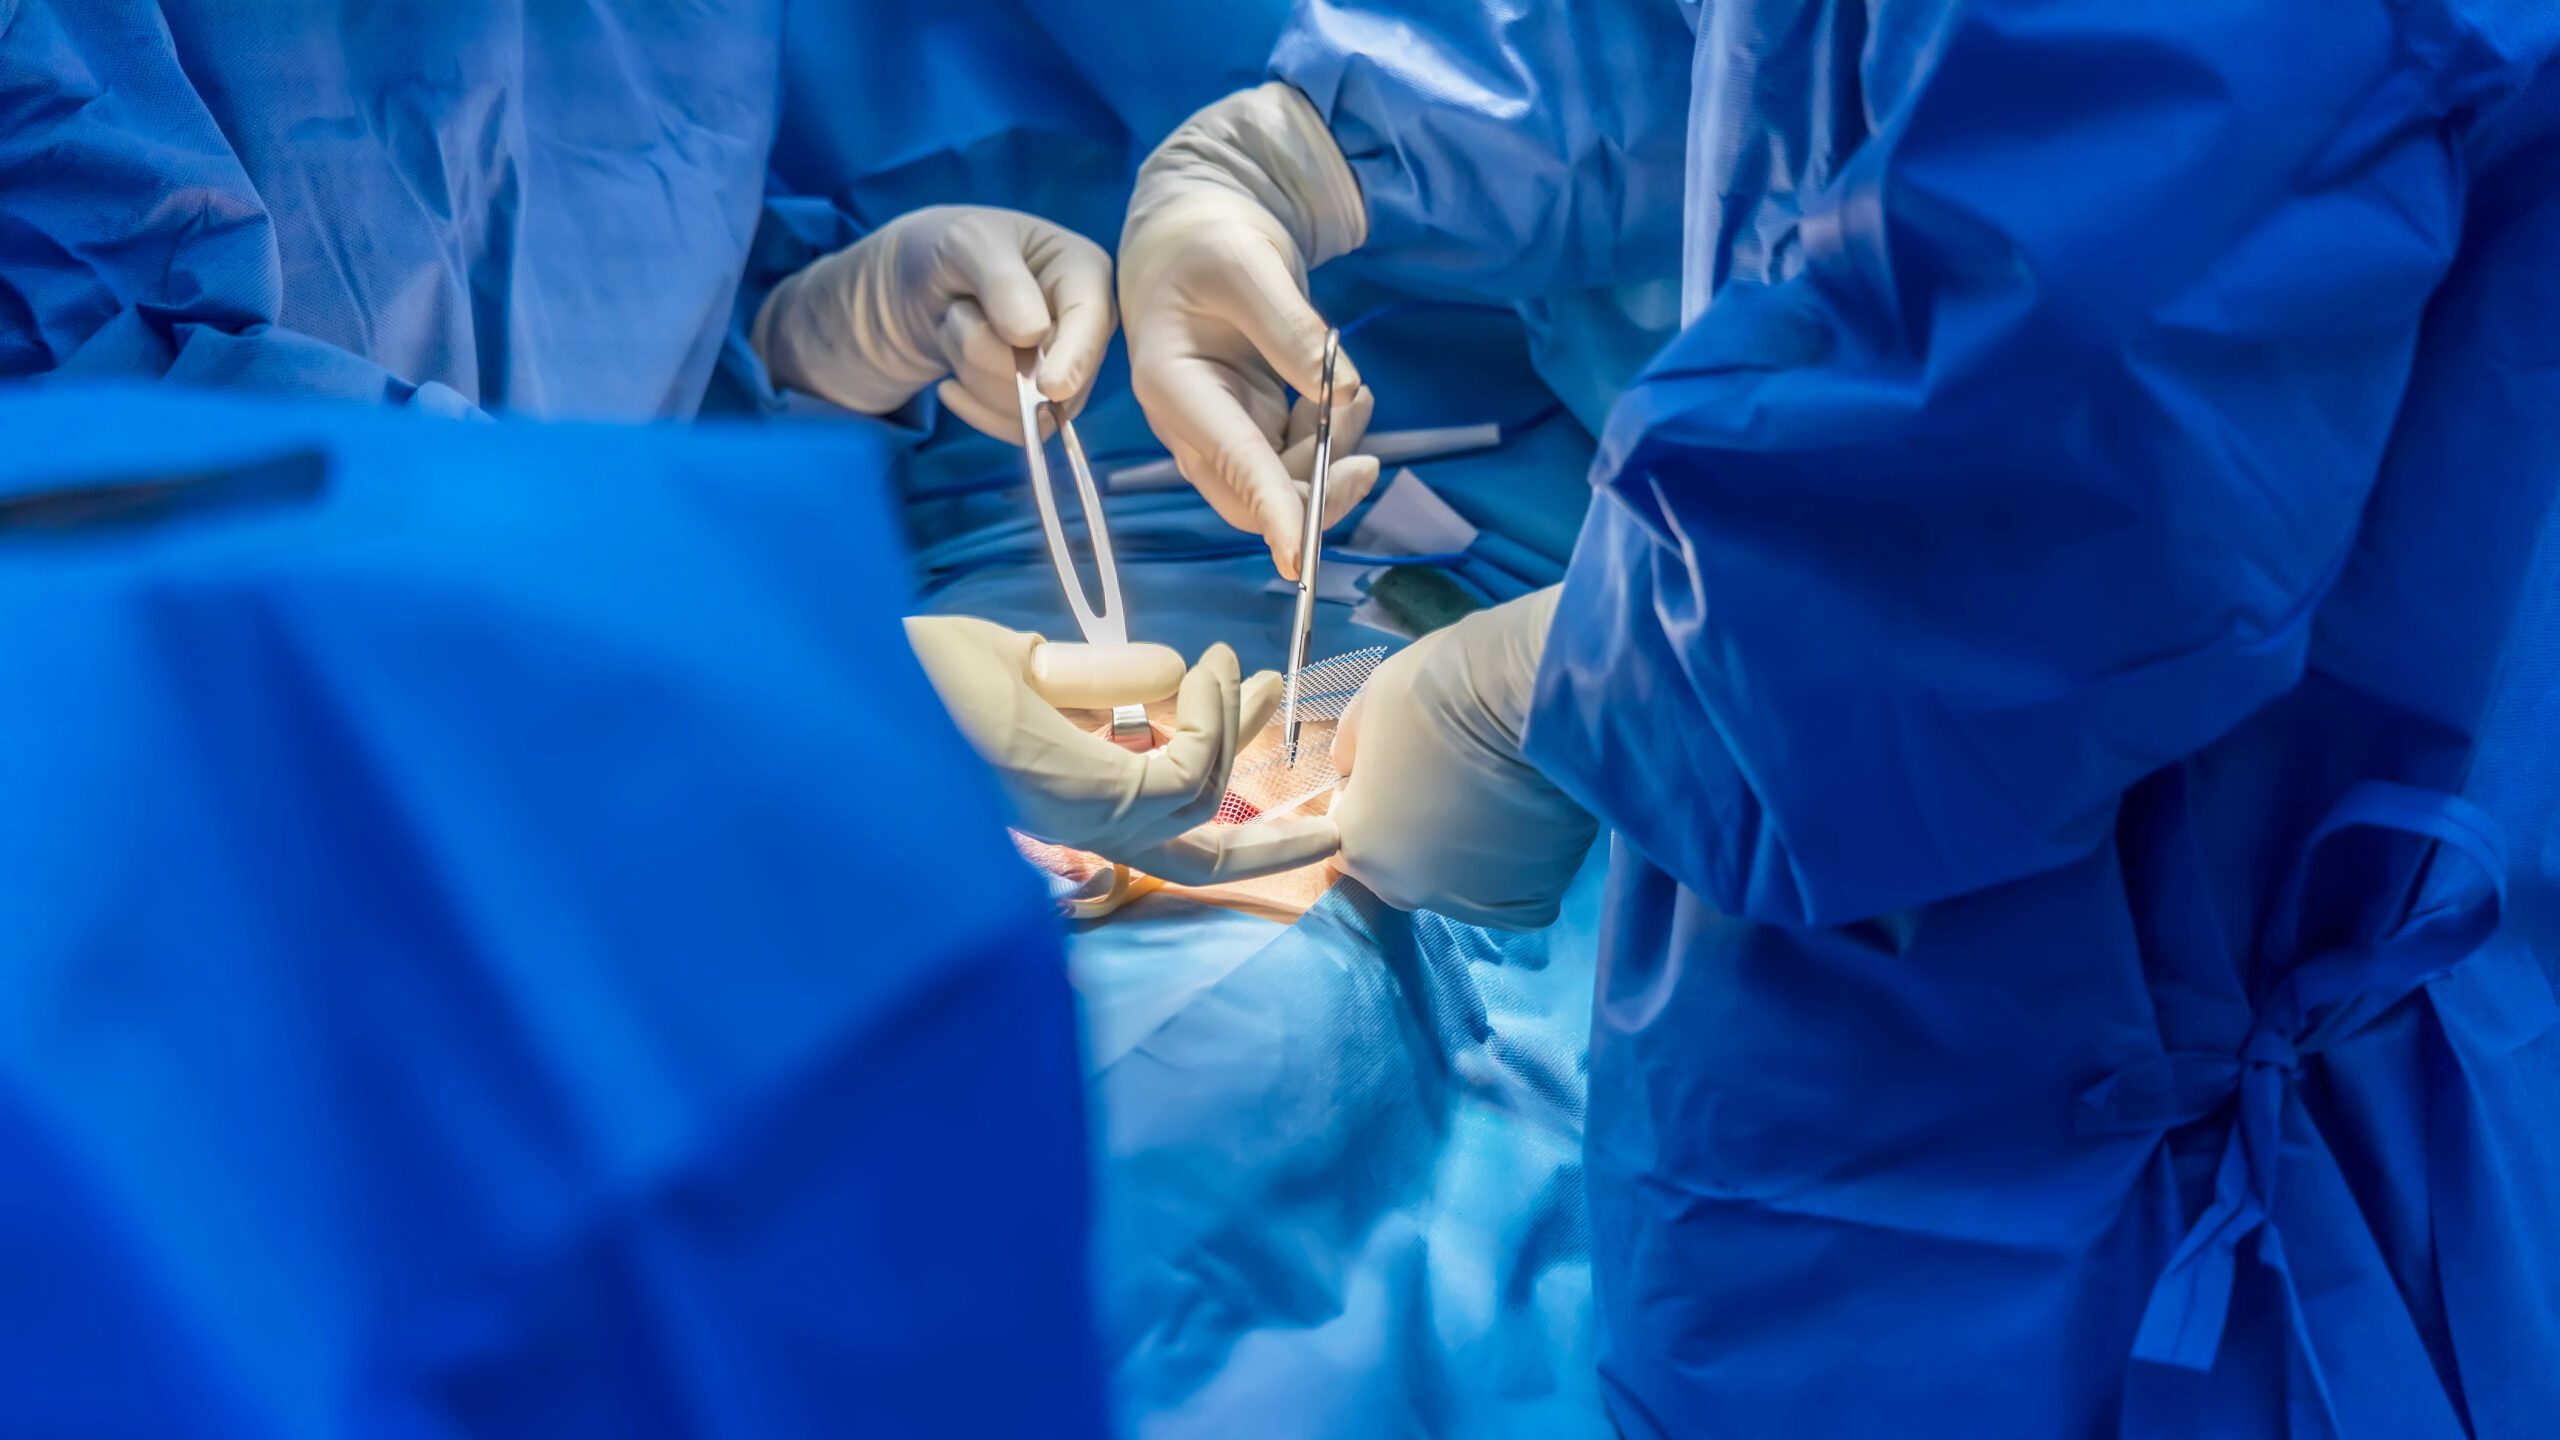 Hospital surgery with blue gowns and surgical tools